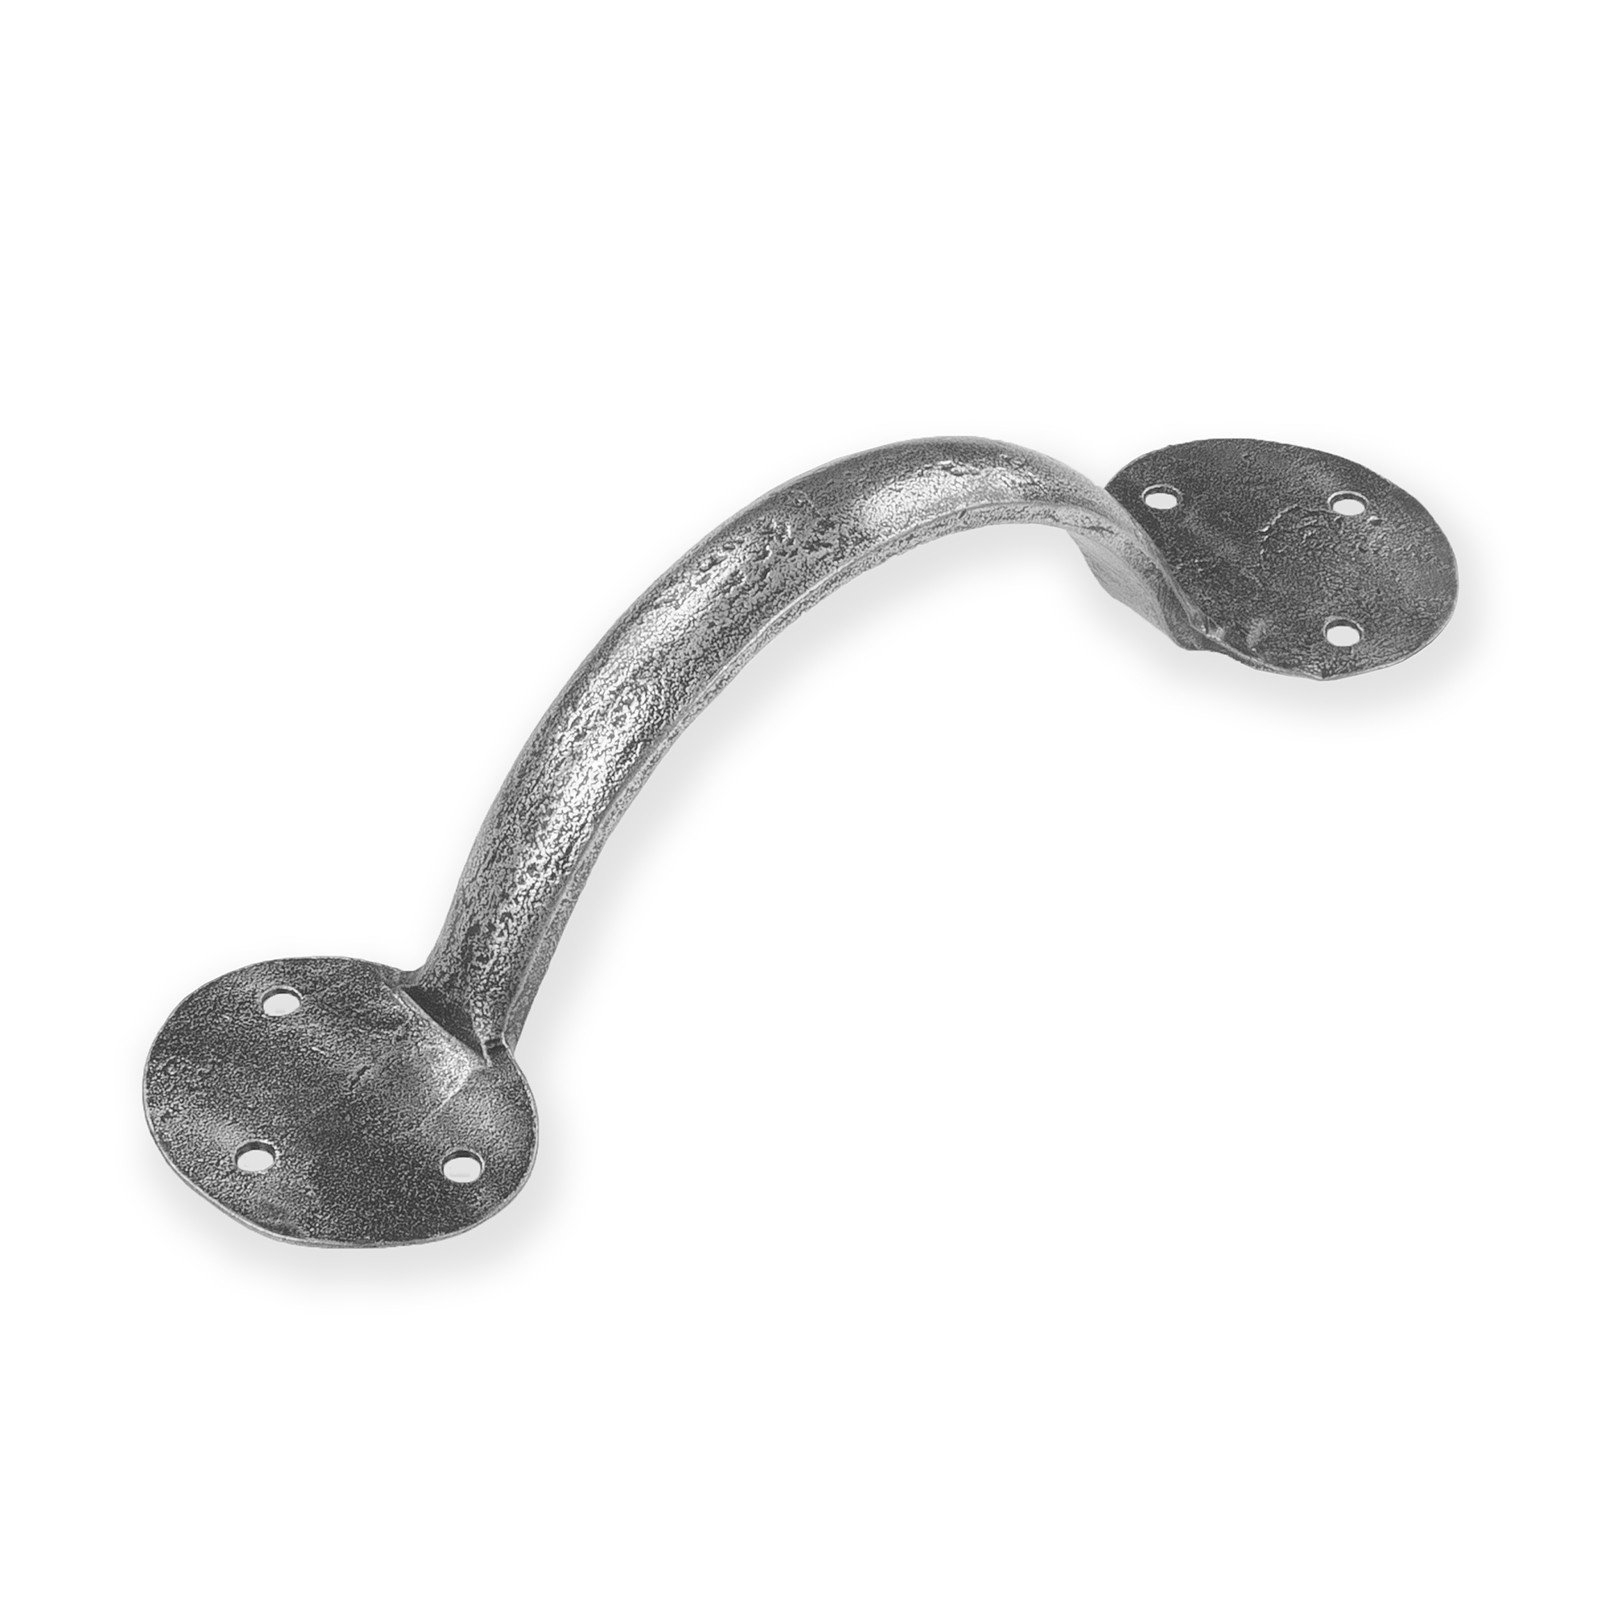 Penny End Pewter Pulls